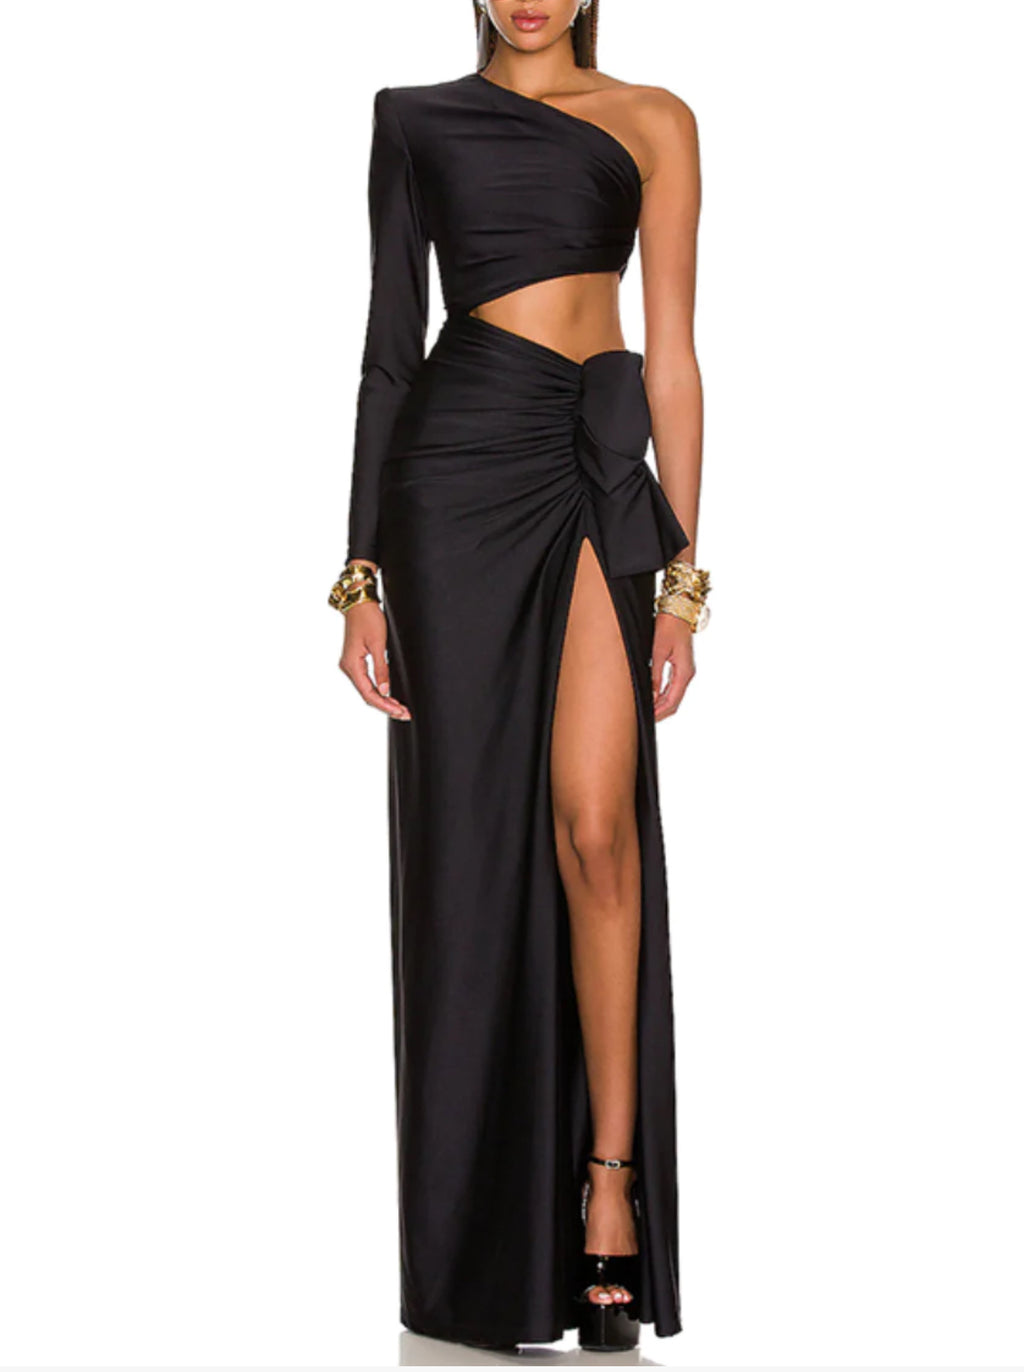 NEXT DAY DELIVERY GIORGIA One Shoulder Cut Out Bodycon Dress